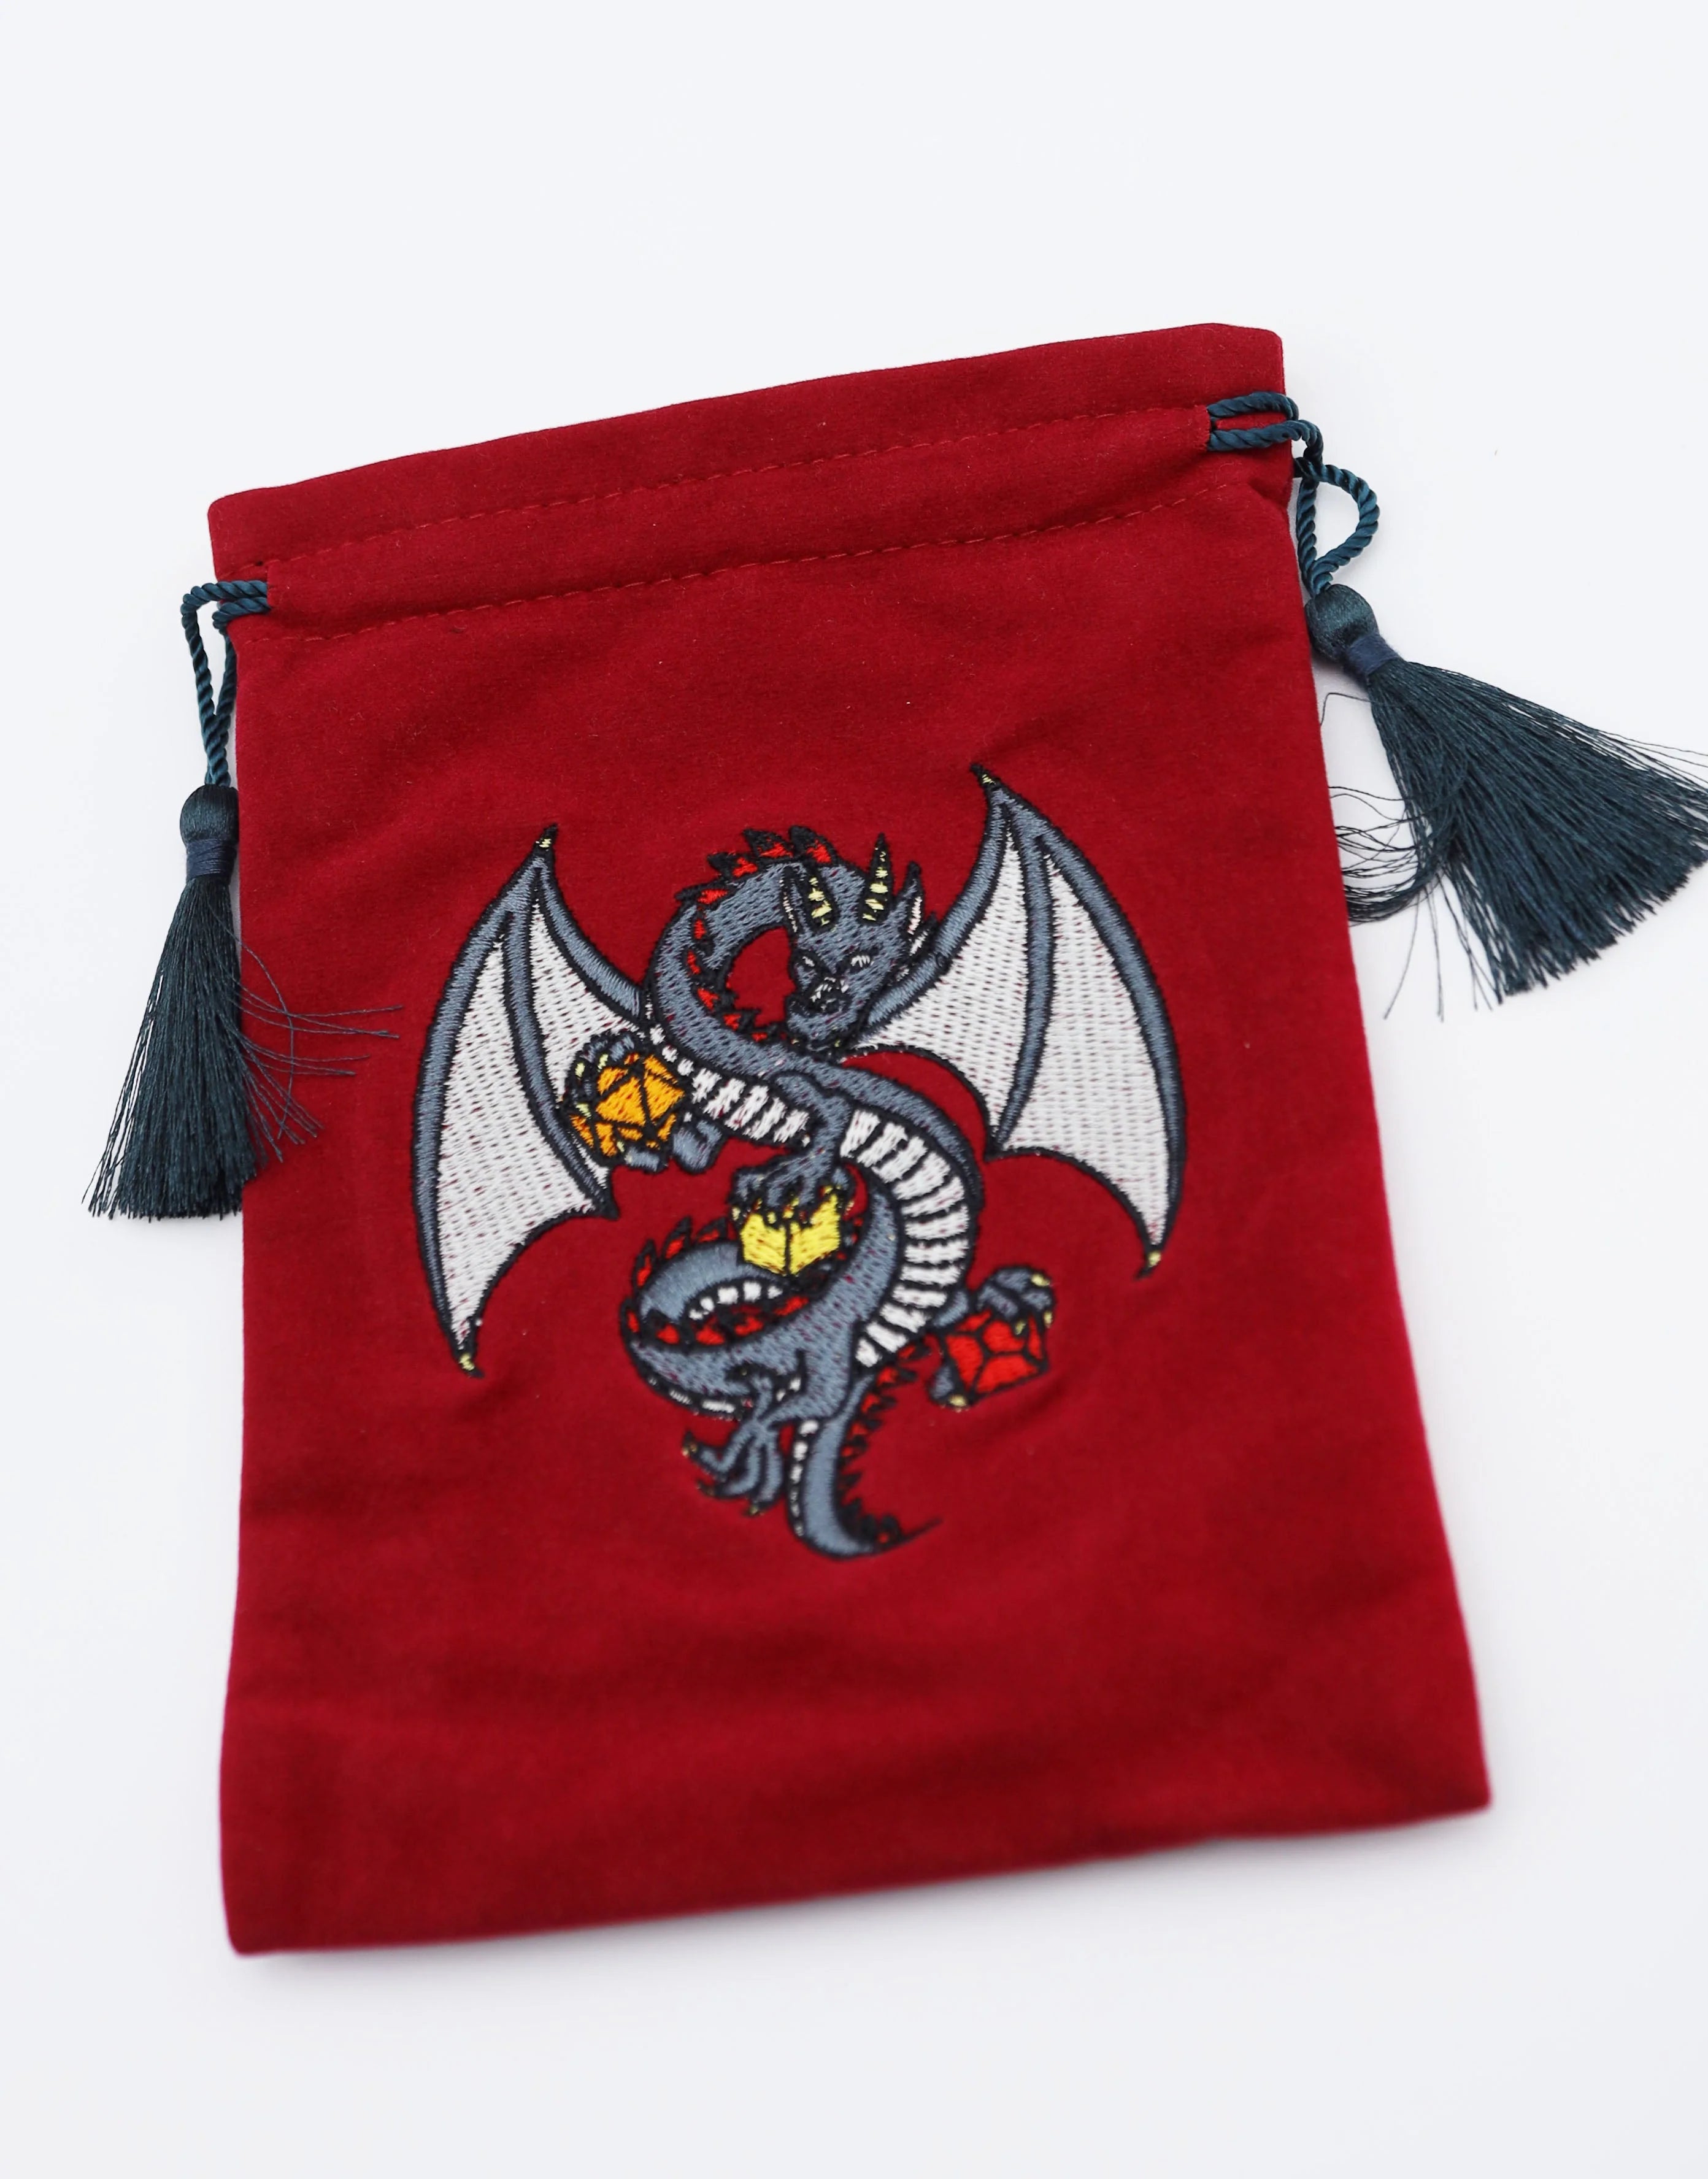 DICE BAG - BLACK DRAGON Dice & Counters Foam Brain Games    | Red Claw Gaming